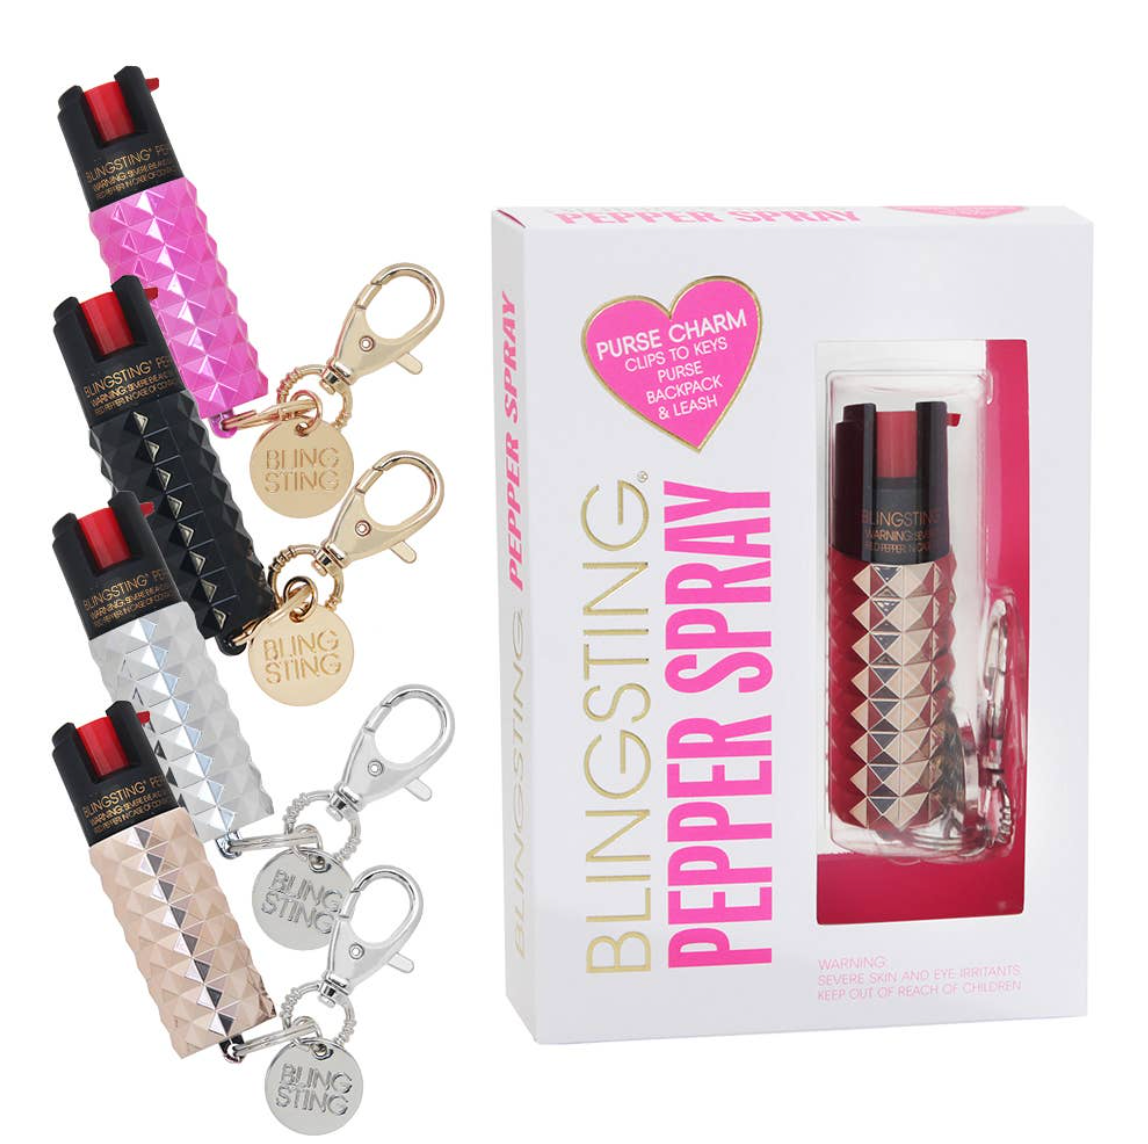 BlingSting Pepper Spray – CoutureCollective